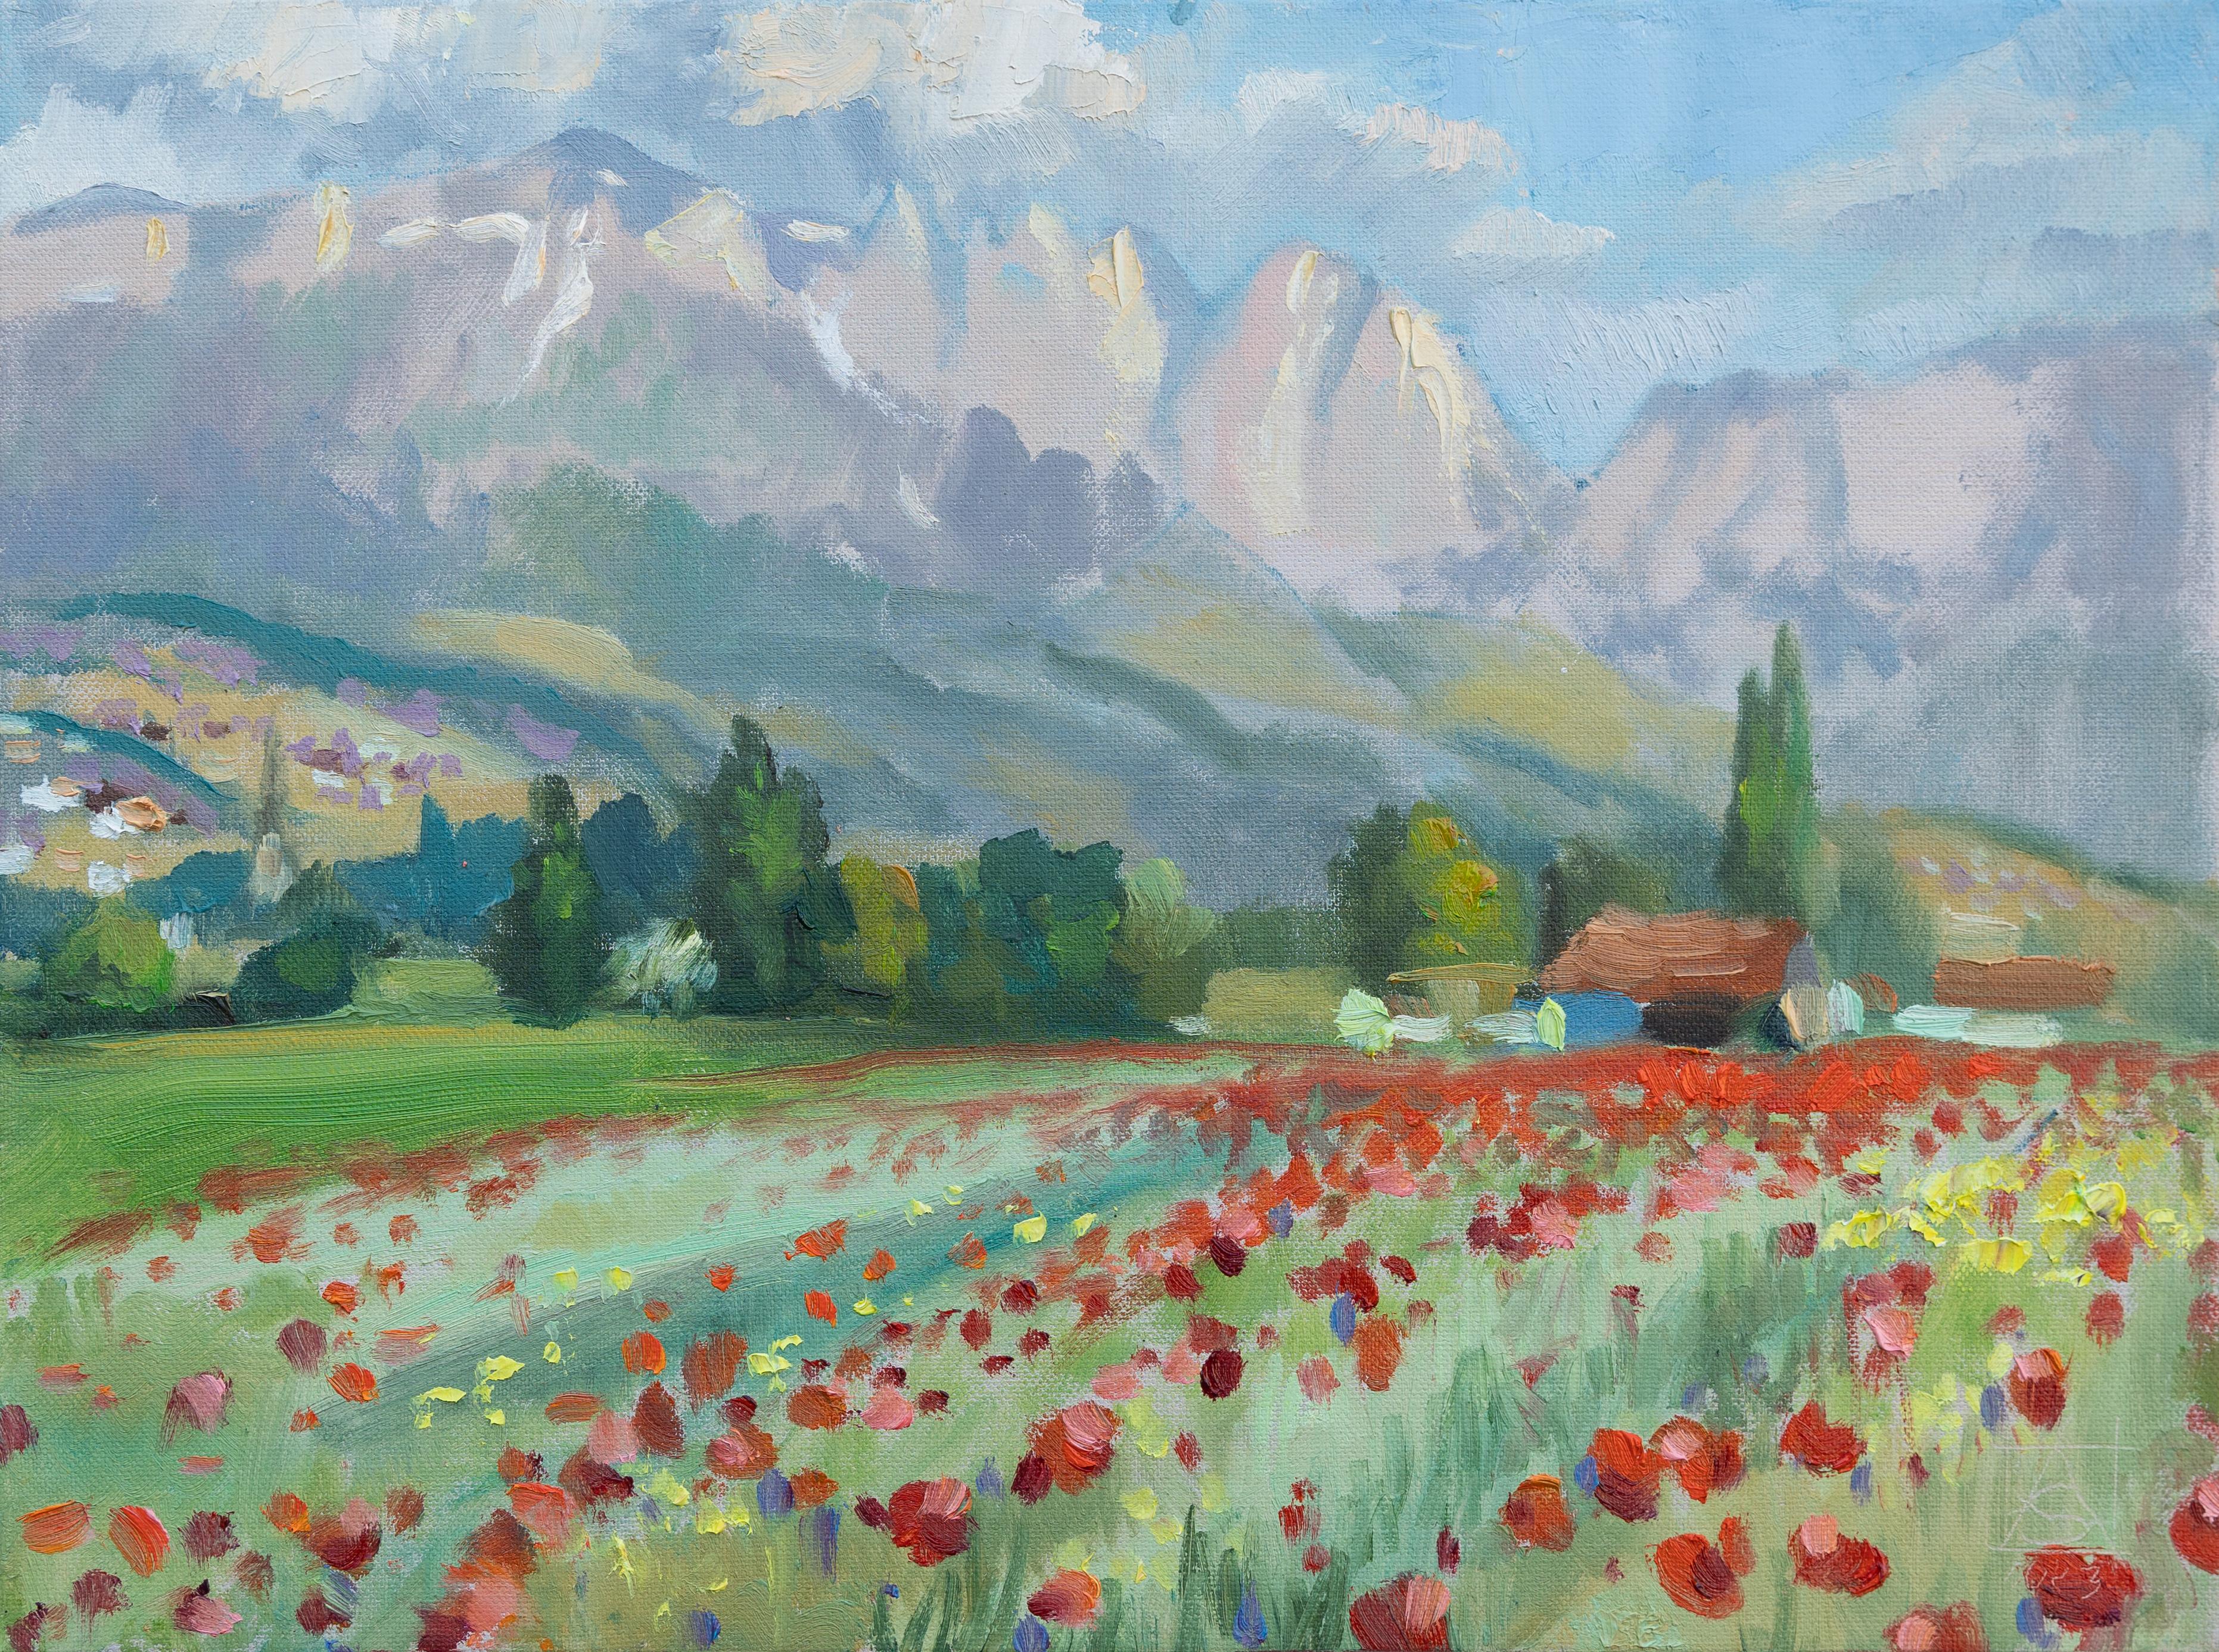 Anna Shesterikova Landscape Painting - Poppies Of The Rhine Valley